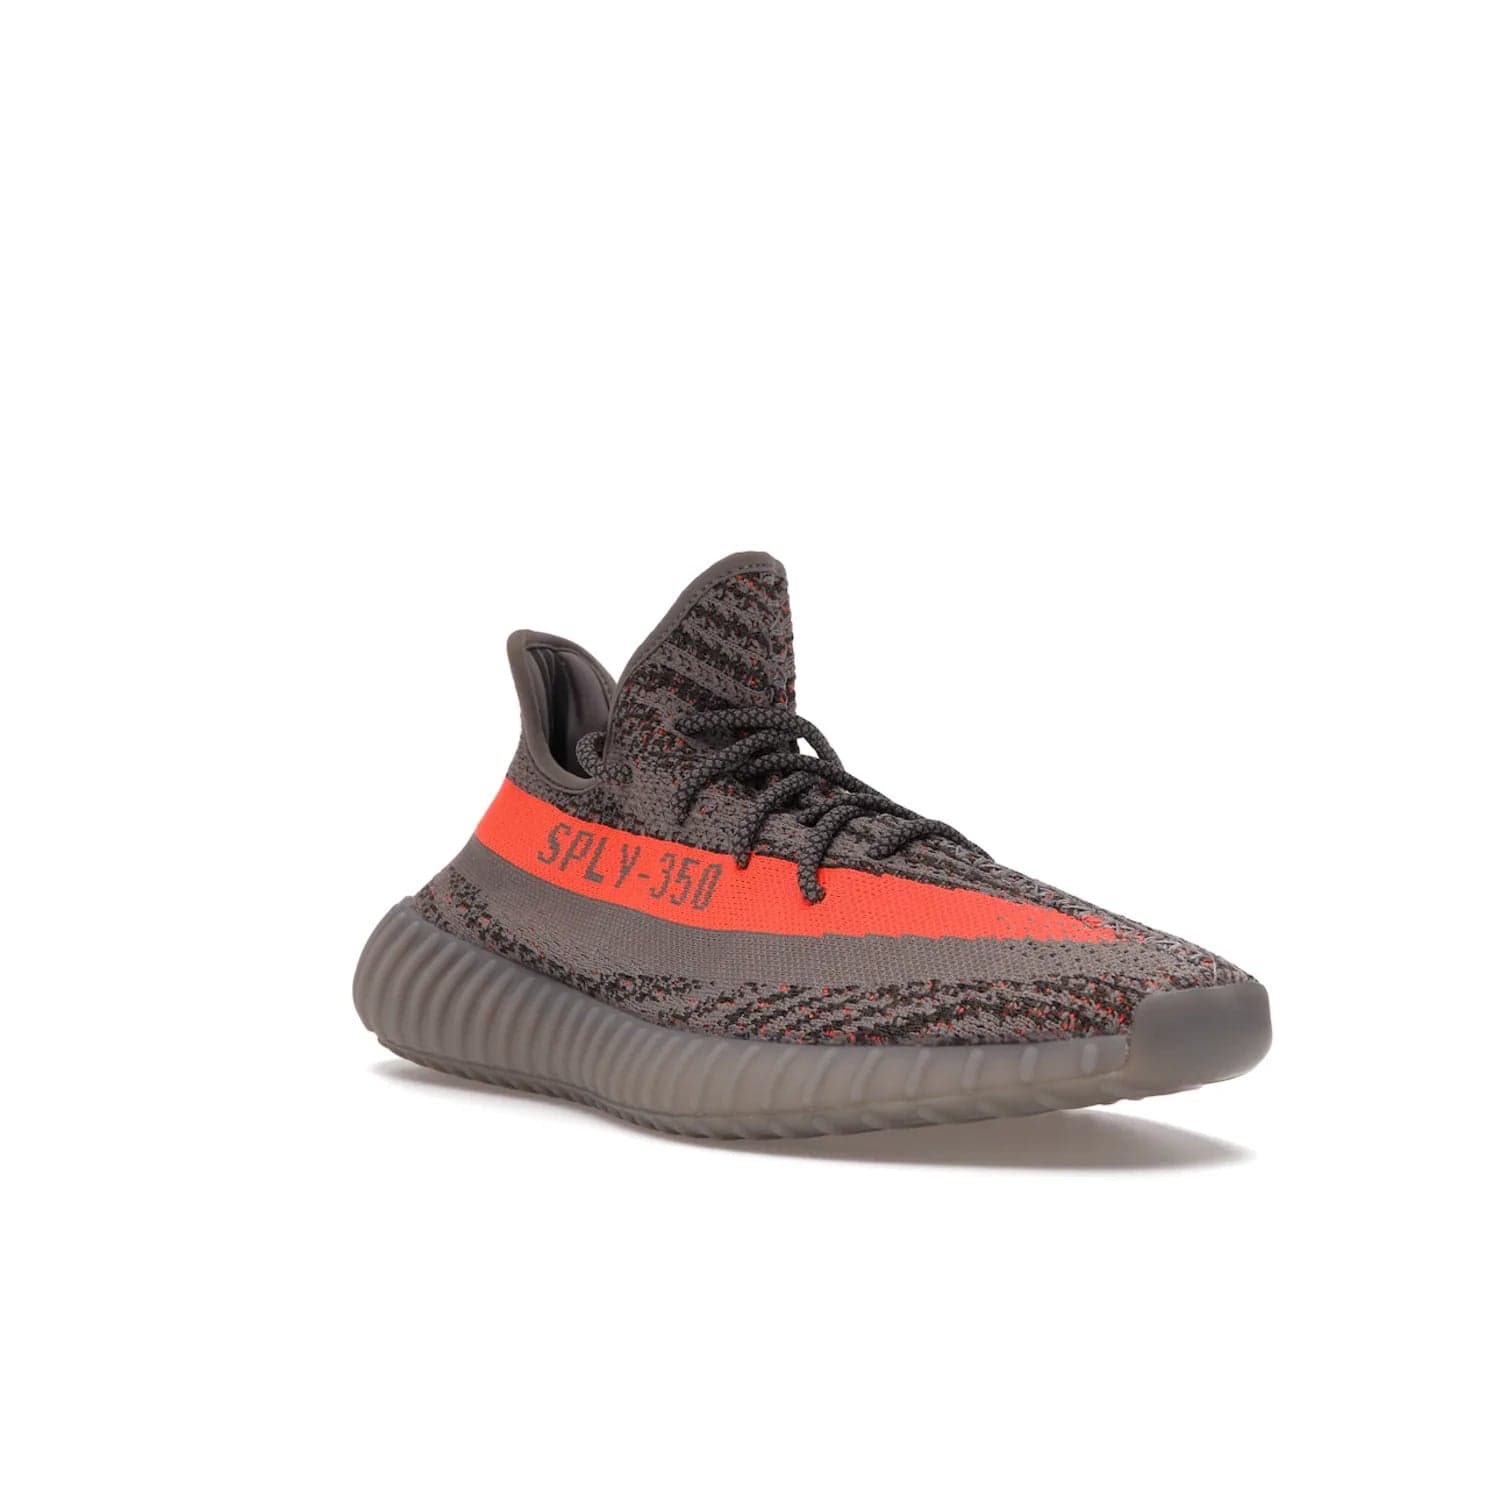 adidas Yeezy Boost 350 V2 Beluga Reflective - Image 6 - Only at www.BallersClubKickz.com - Shop the adidas Yeezy Boost 350 V2 Beluga Reflective: a stylish, reflective sneaker that stands out. Featuring Boost sole, Primeknit upper & signature orange stripe. Available Dec 2021.